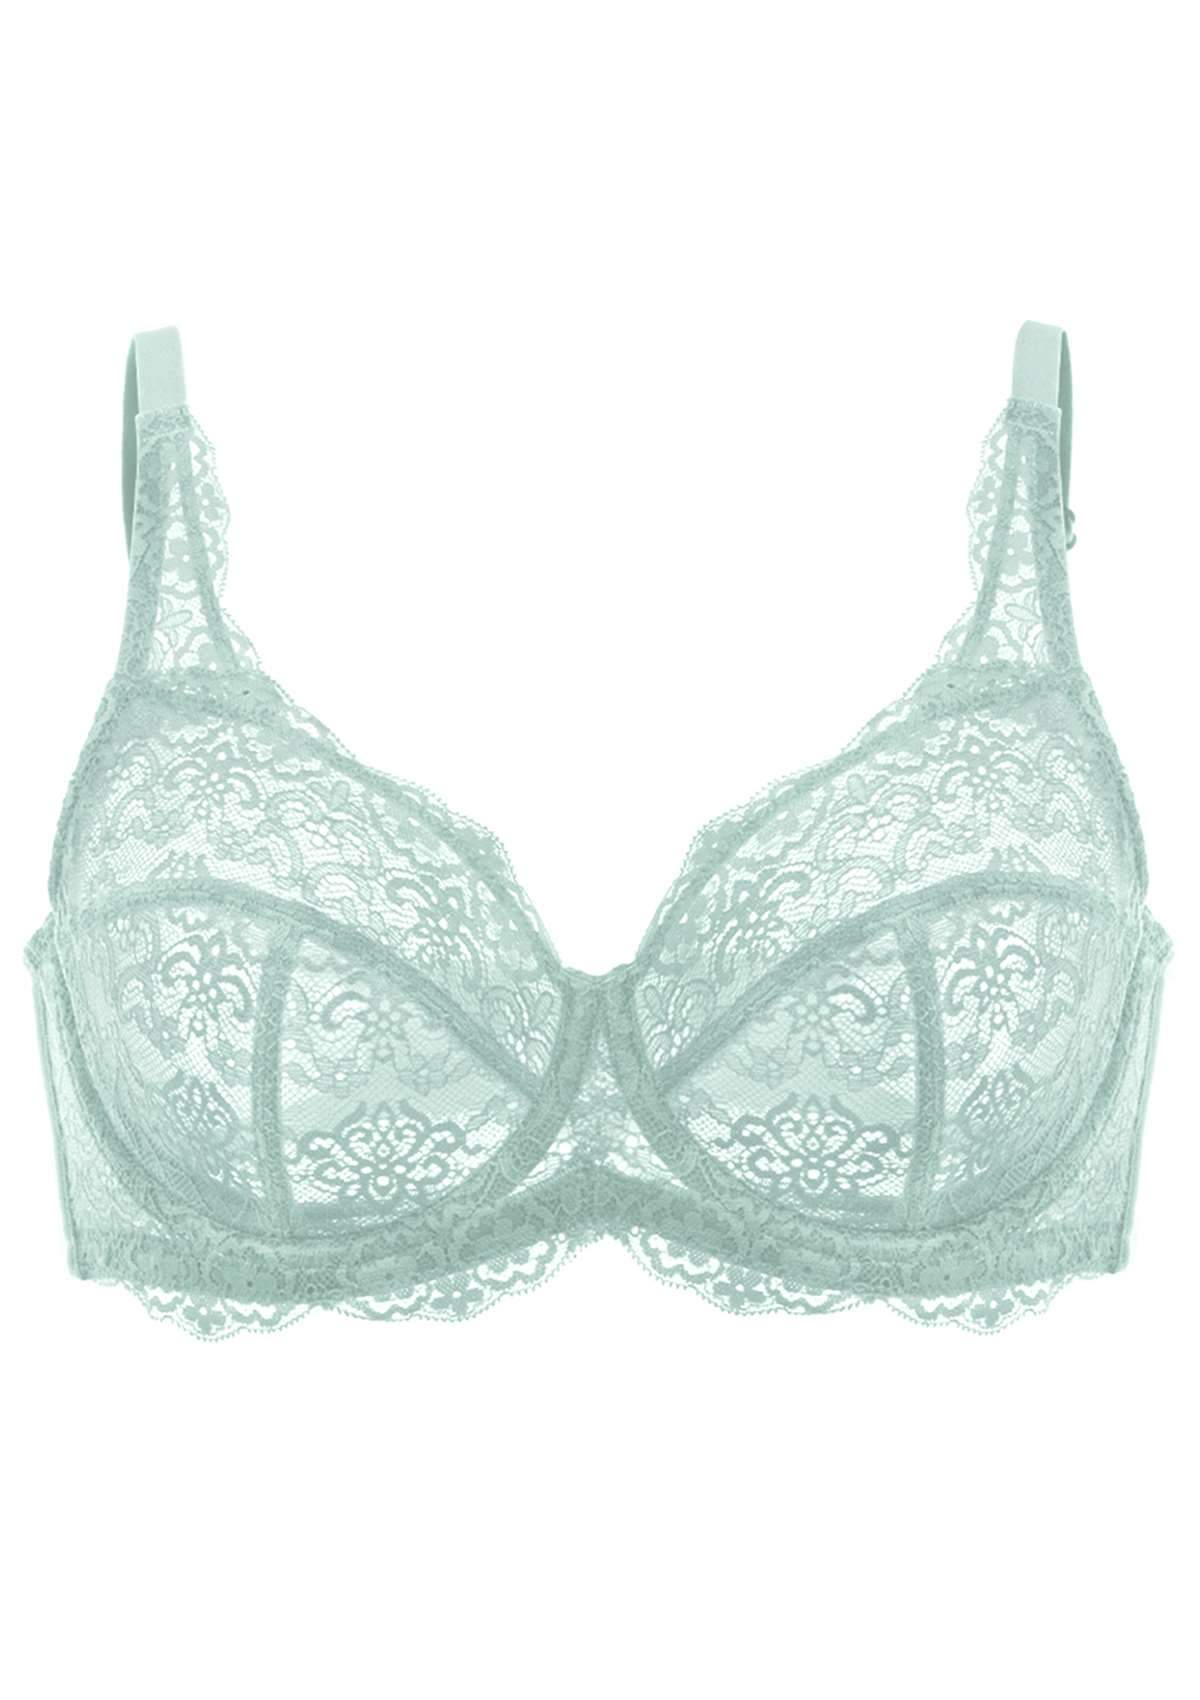 HSIA All-Over Floral Lace: Best Bra For Elderly With Sagging Breasts - Crystal Blue / 40 / C